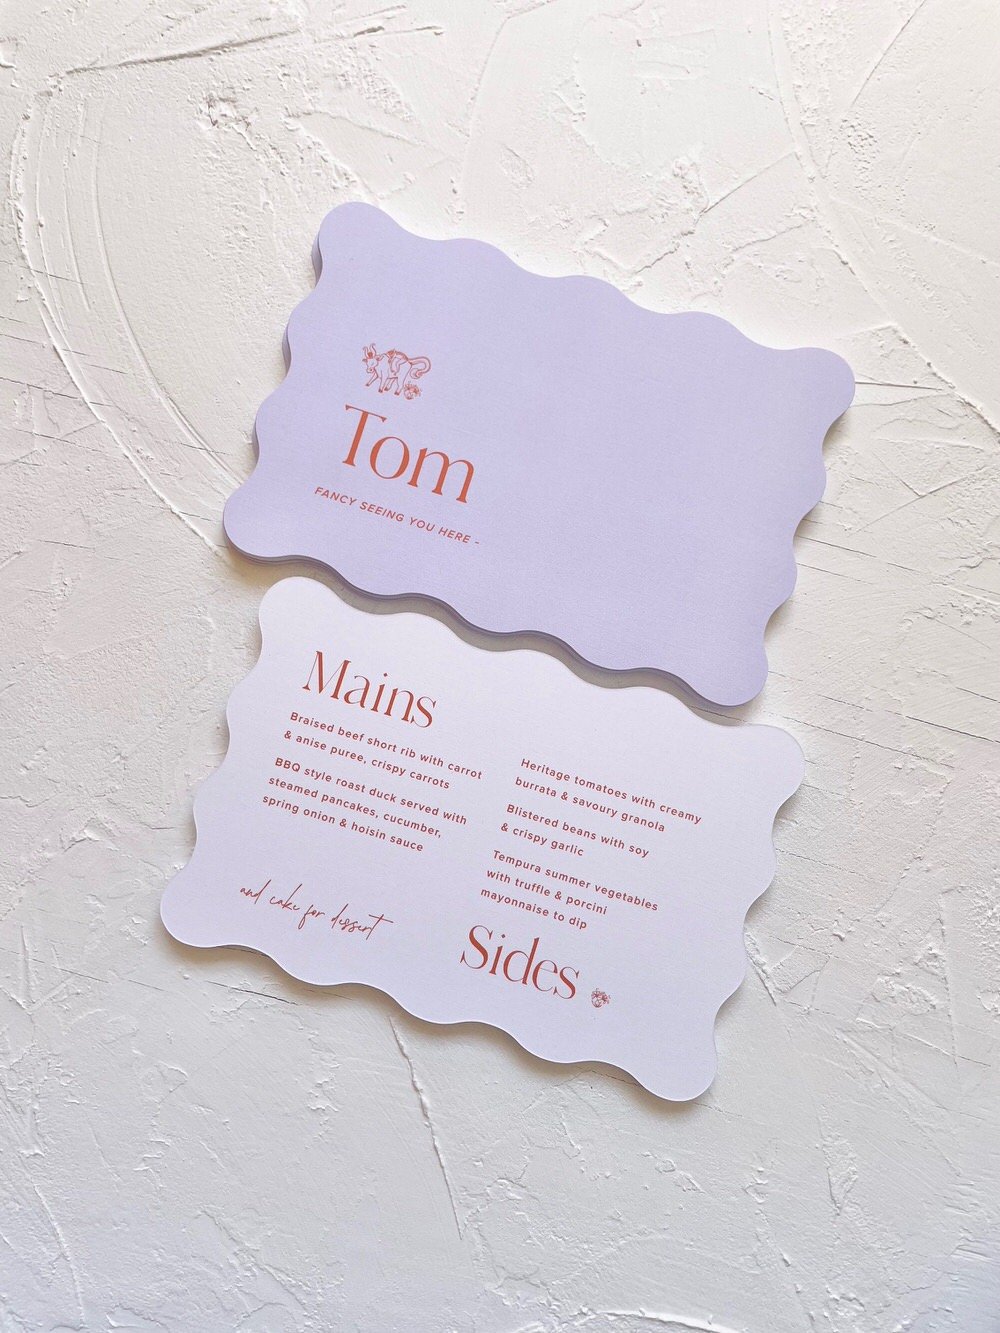 Just My Type Wedding Invitation Stationery NZ Wedding Menu Place Name Table Number7241.jpg